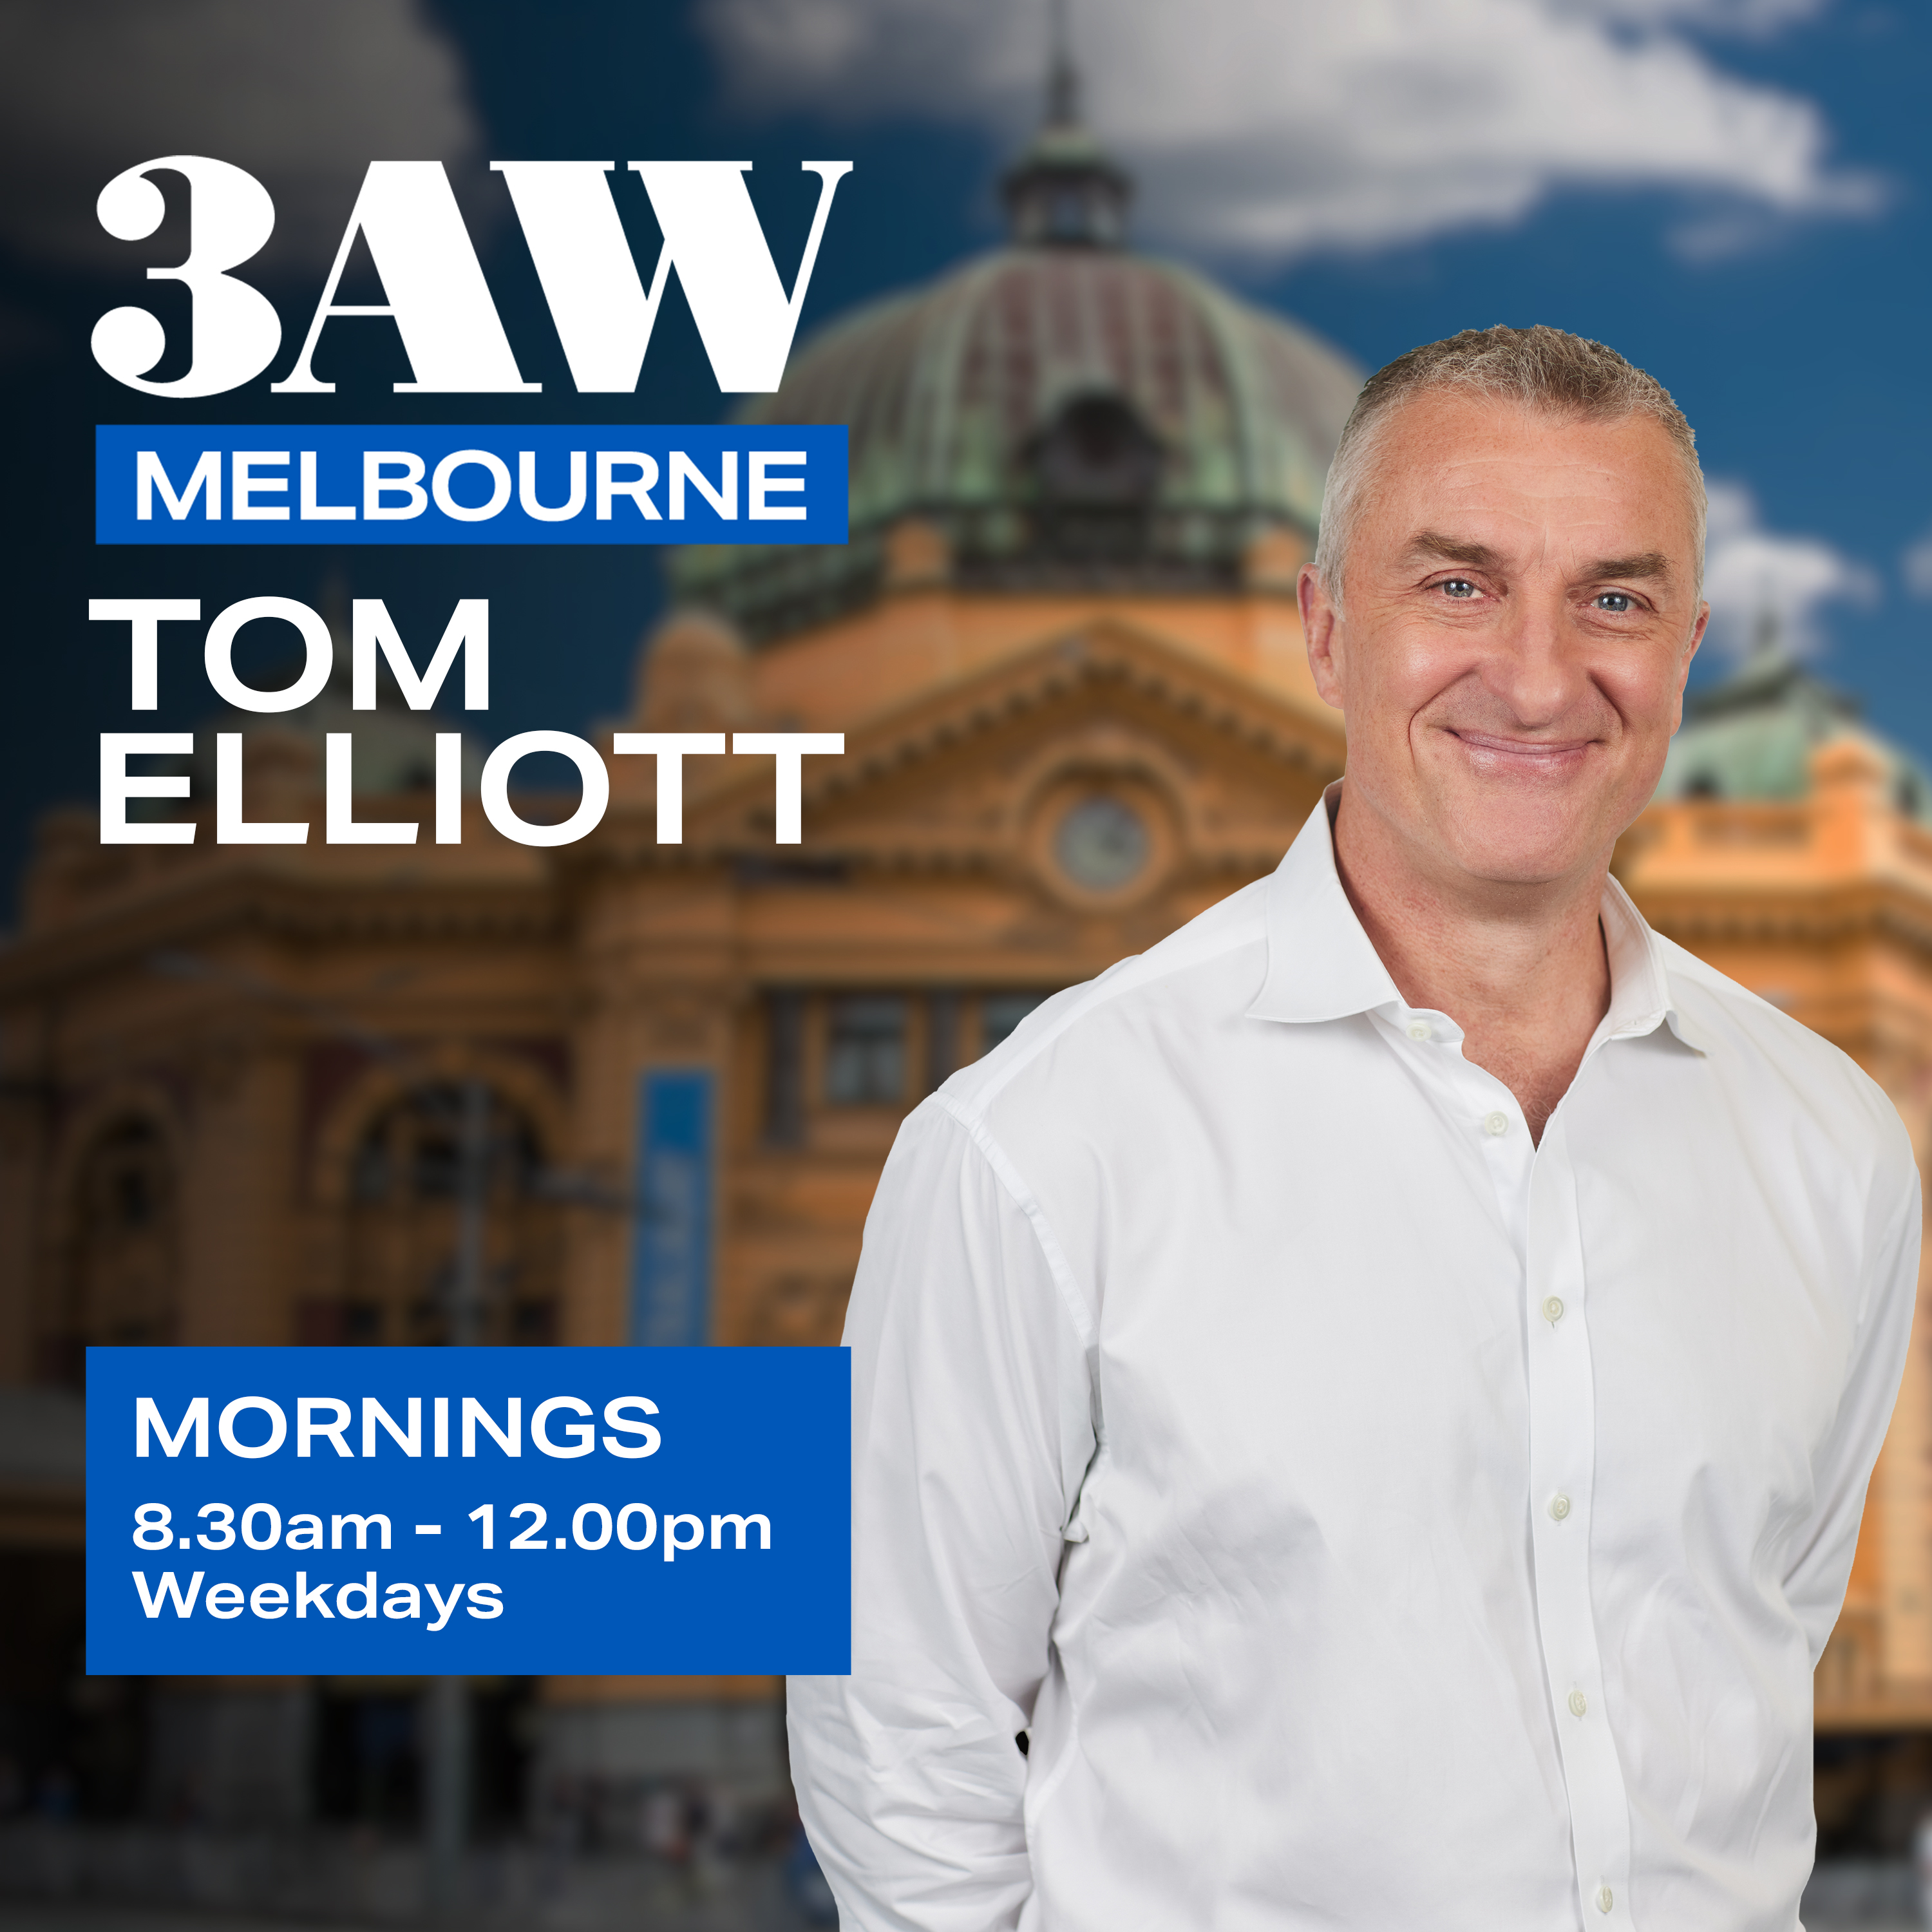 The two issues Tom Elliott has with an 'interesting' coalition superannuation policy